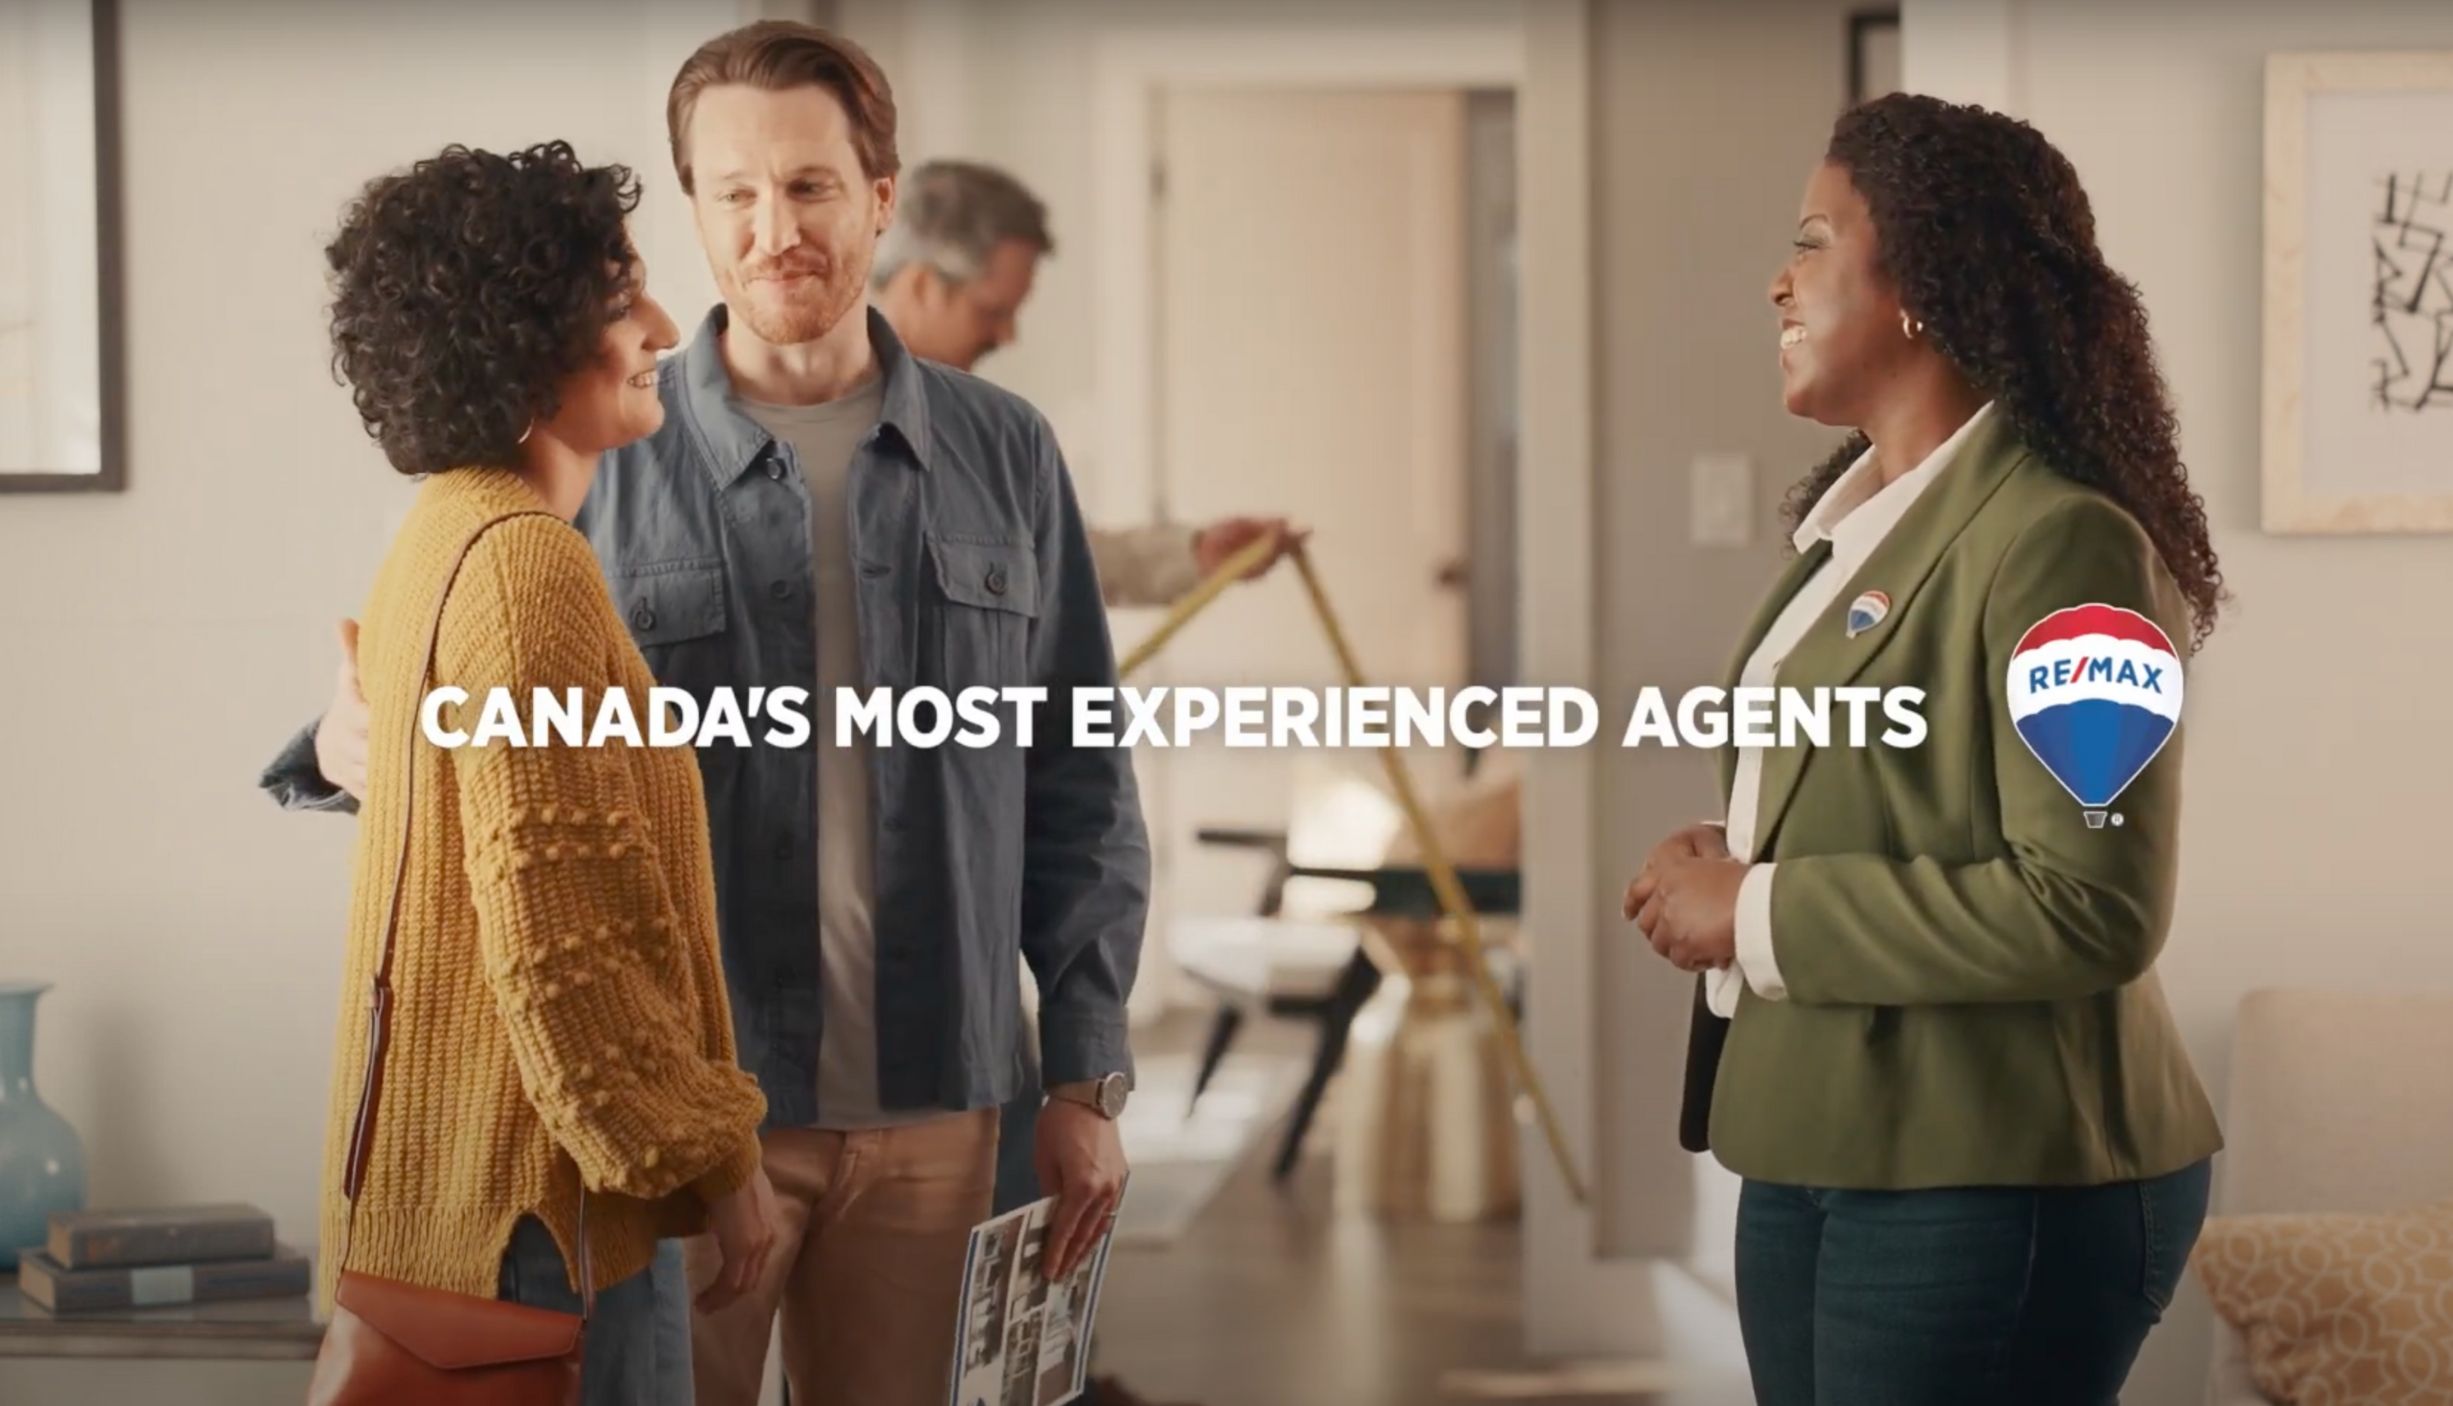 RE/MAX ® Gives Canadians the Advice They Really Need